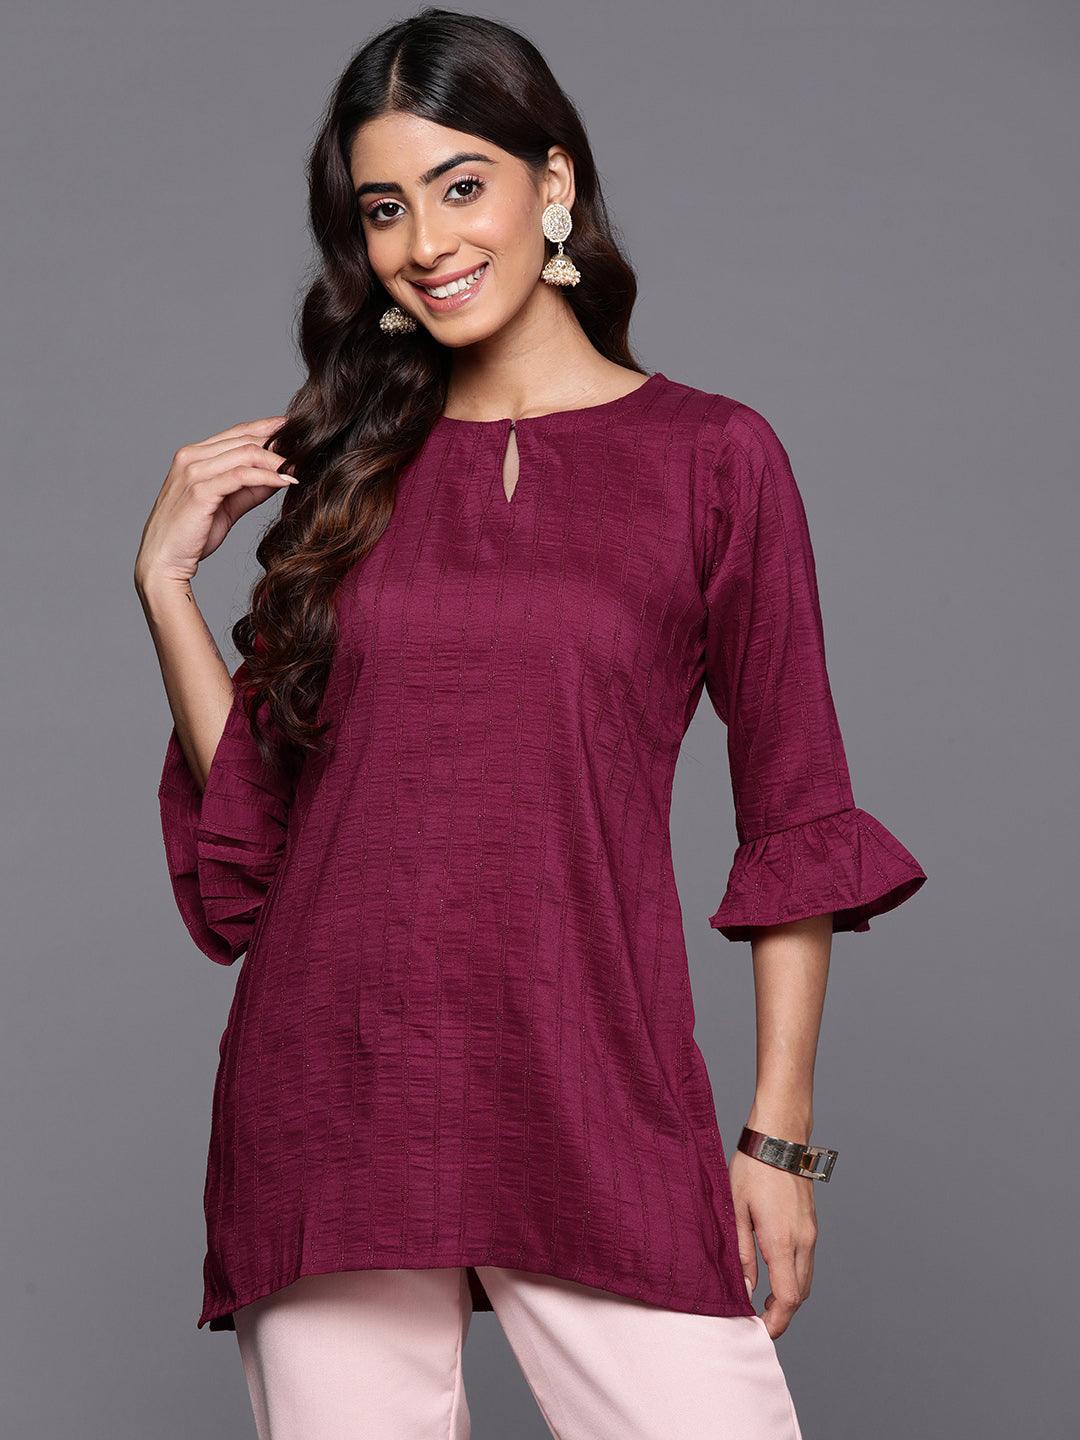 6 Indo-western Kurtis That Will Help You Rock This Look This D-day